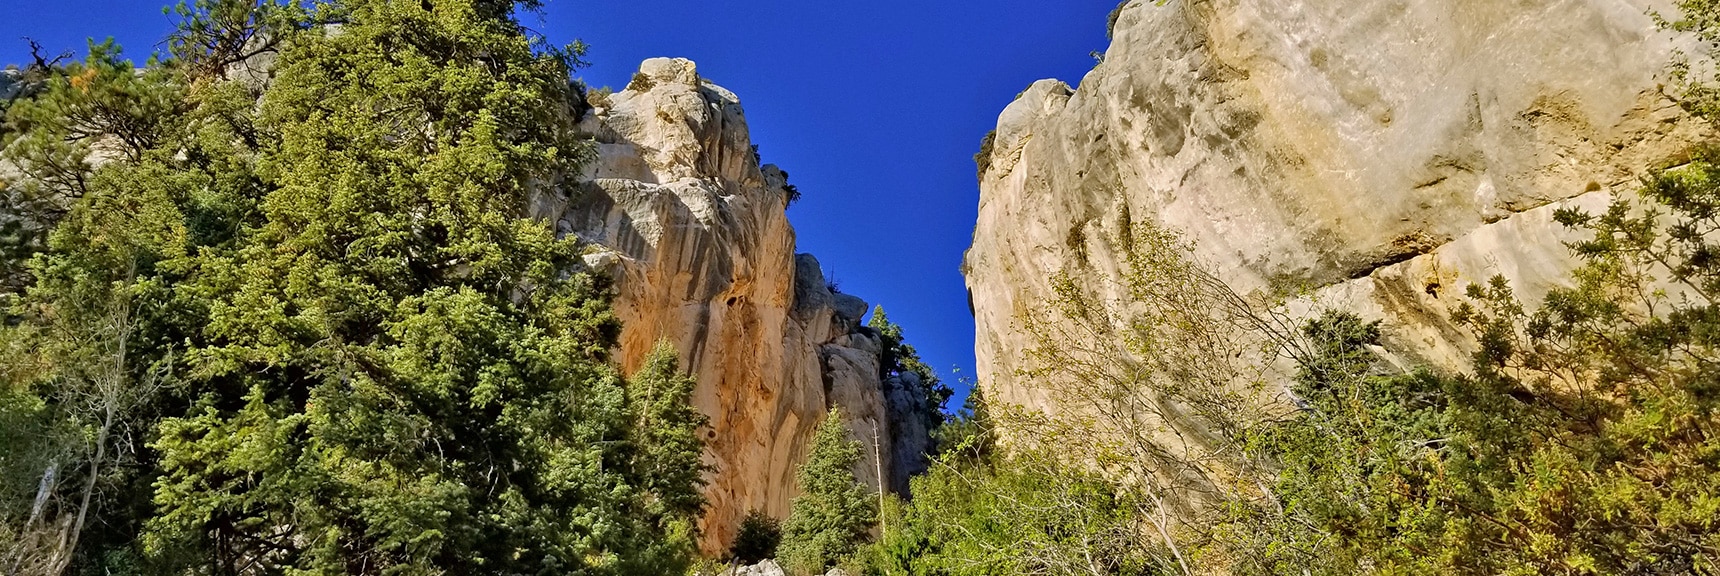 Main Climbing Area from Below | Robbers Roost and Beyond | Spring Mountains, Nevada